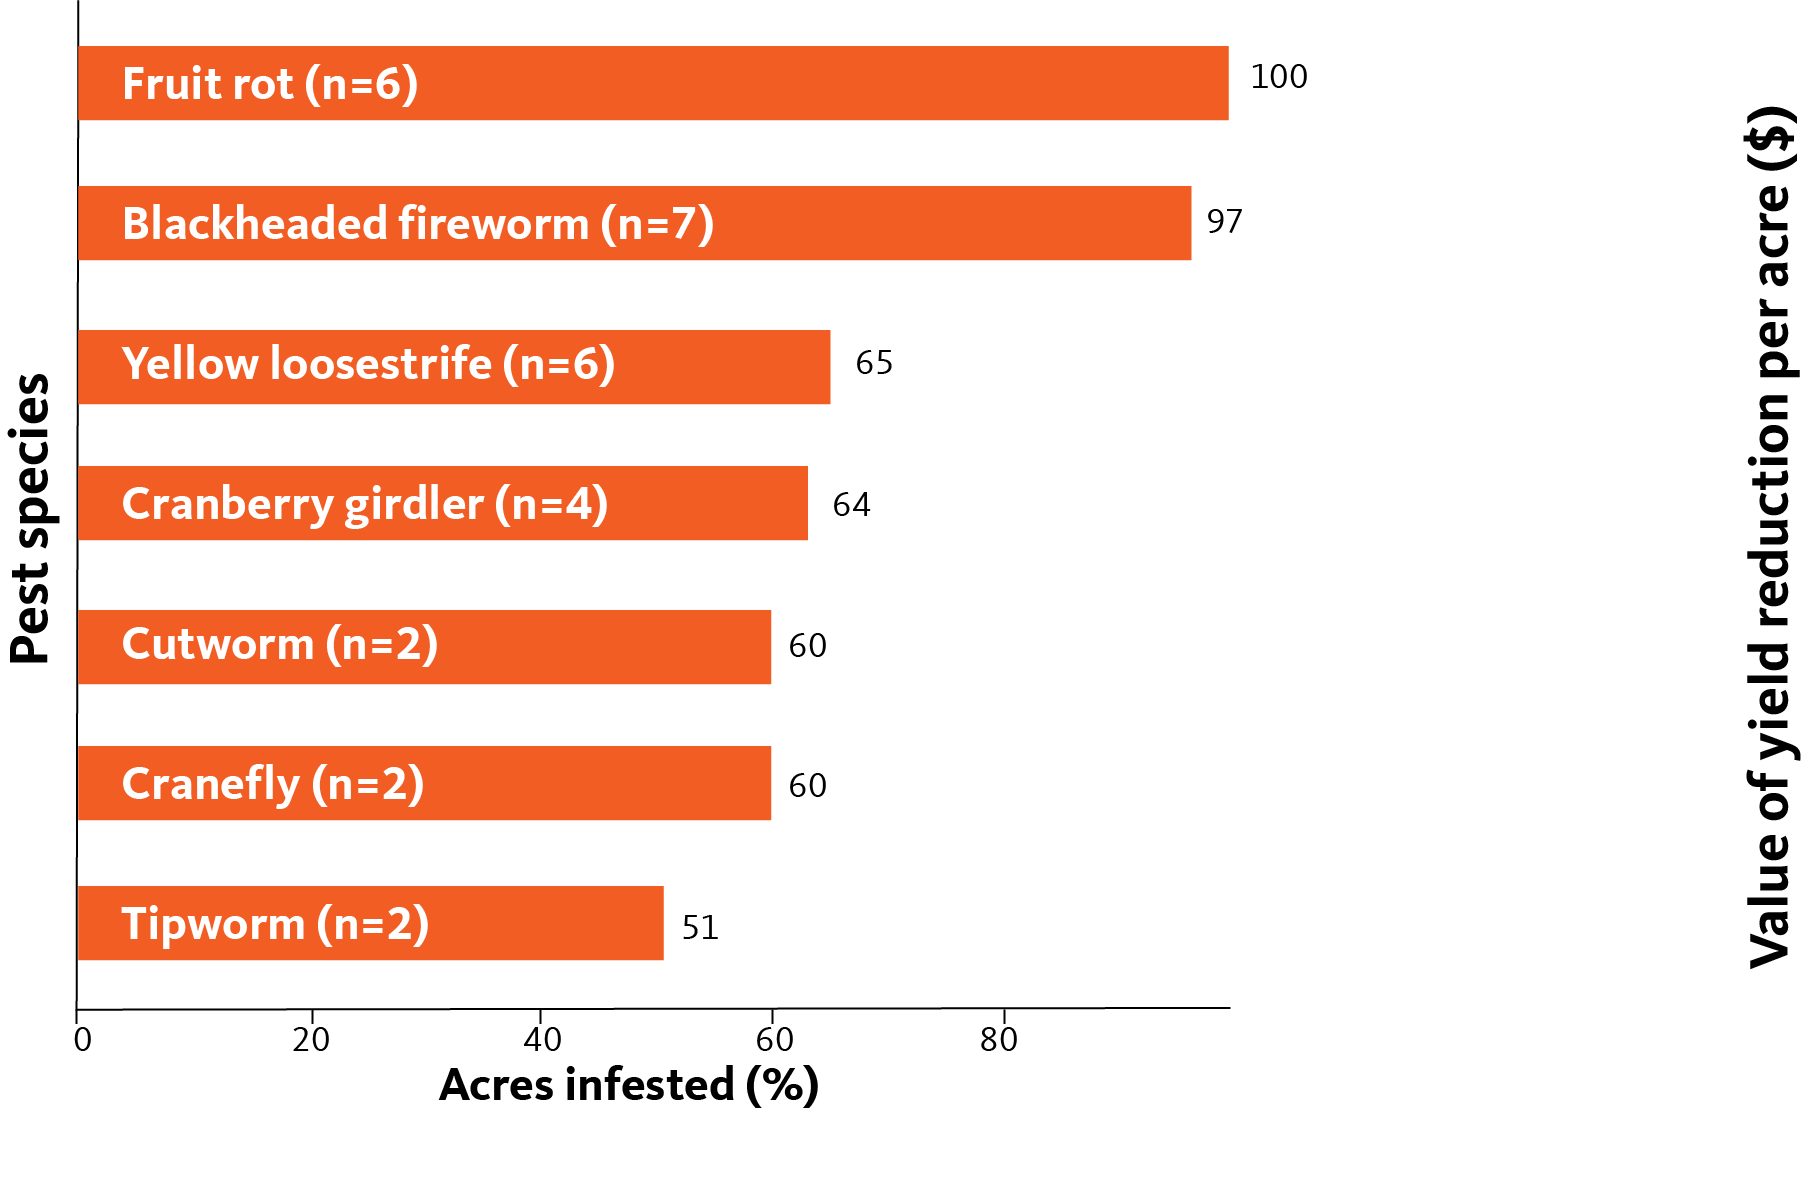 Bar chart showing fruit rot and blackheads firework affecting more acreage